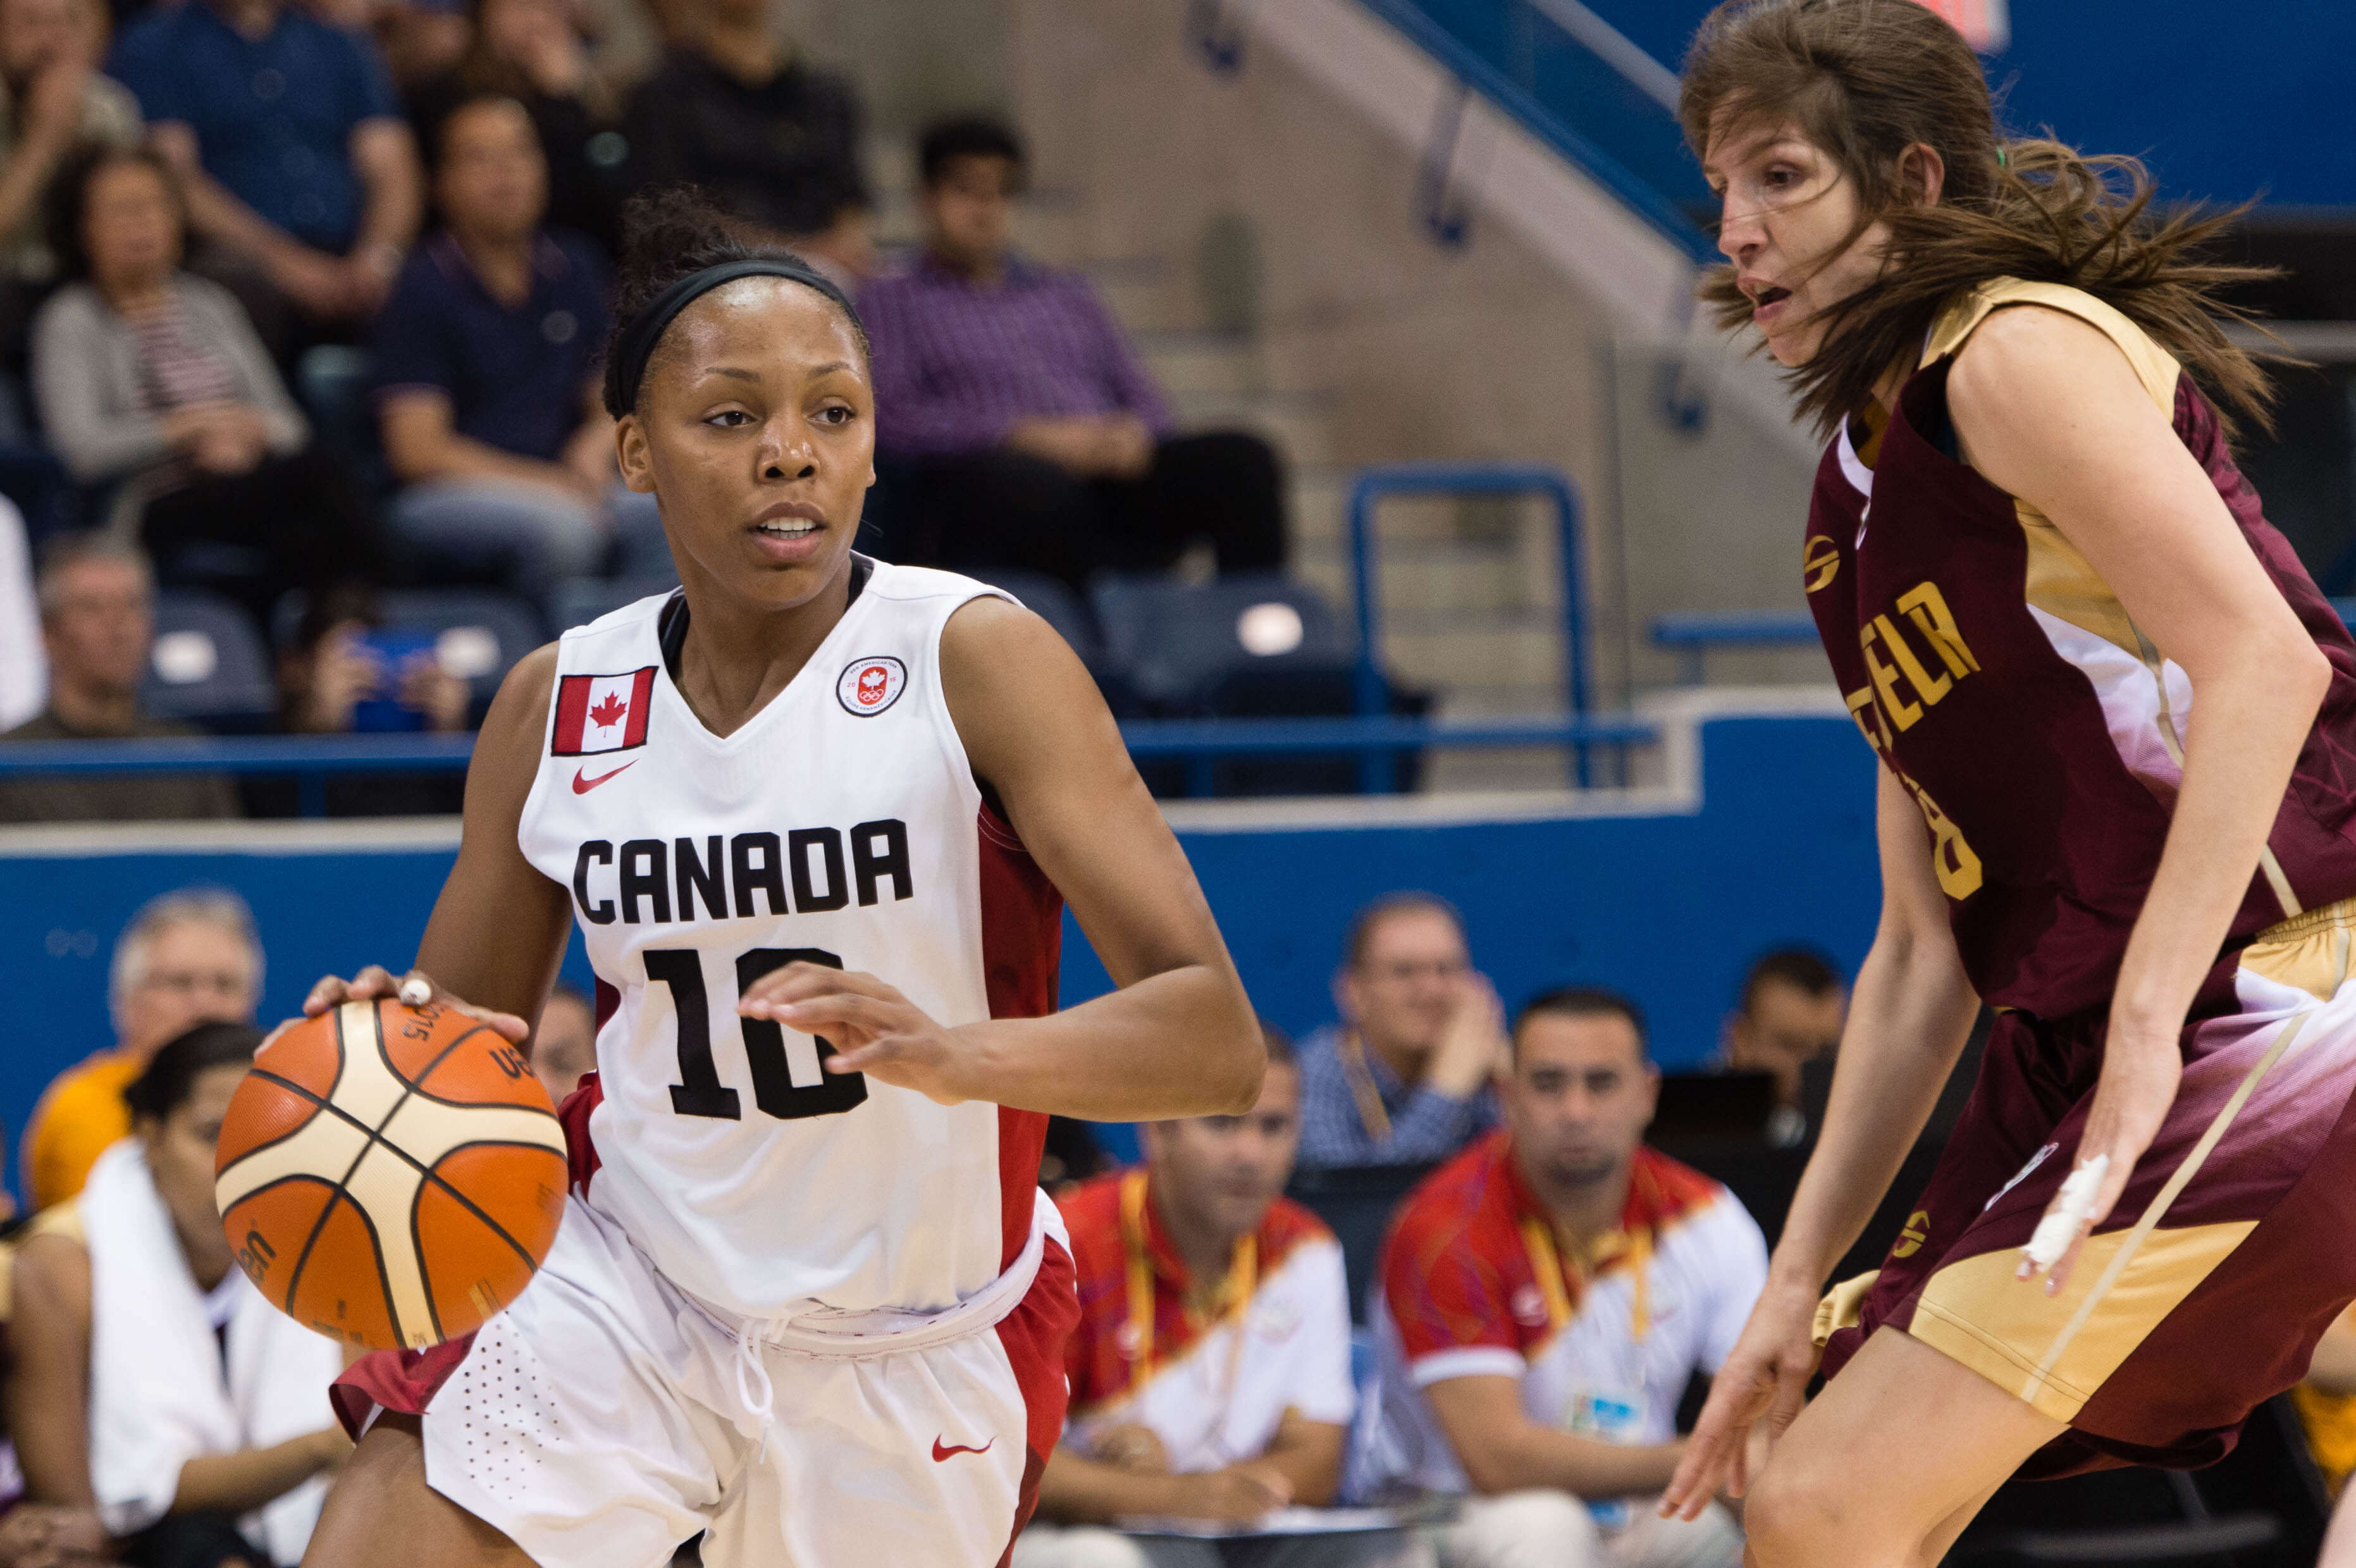 Canada's Nirra Fields competes in Women's Basketball against Venezuela at the 2015 Pan American Games in Toronto, Canada. COC Photo by Winston Chow